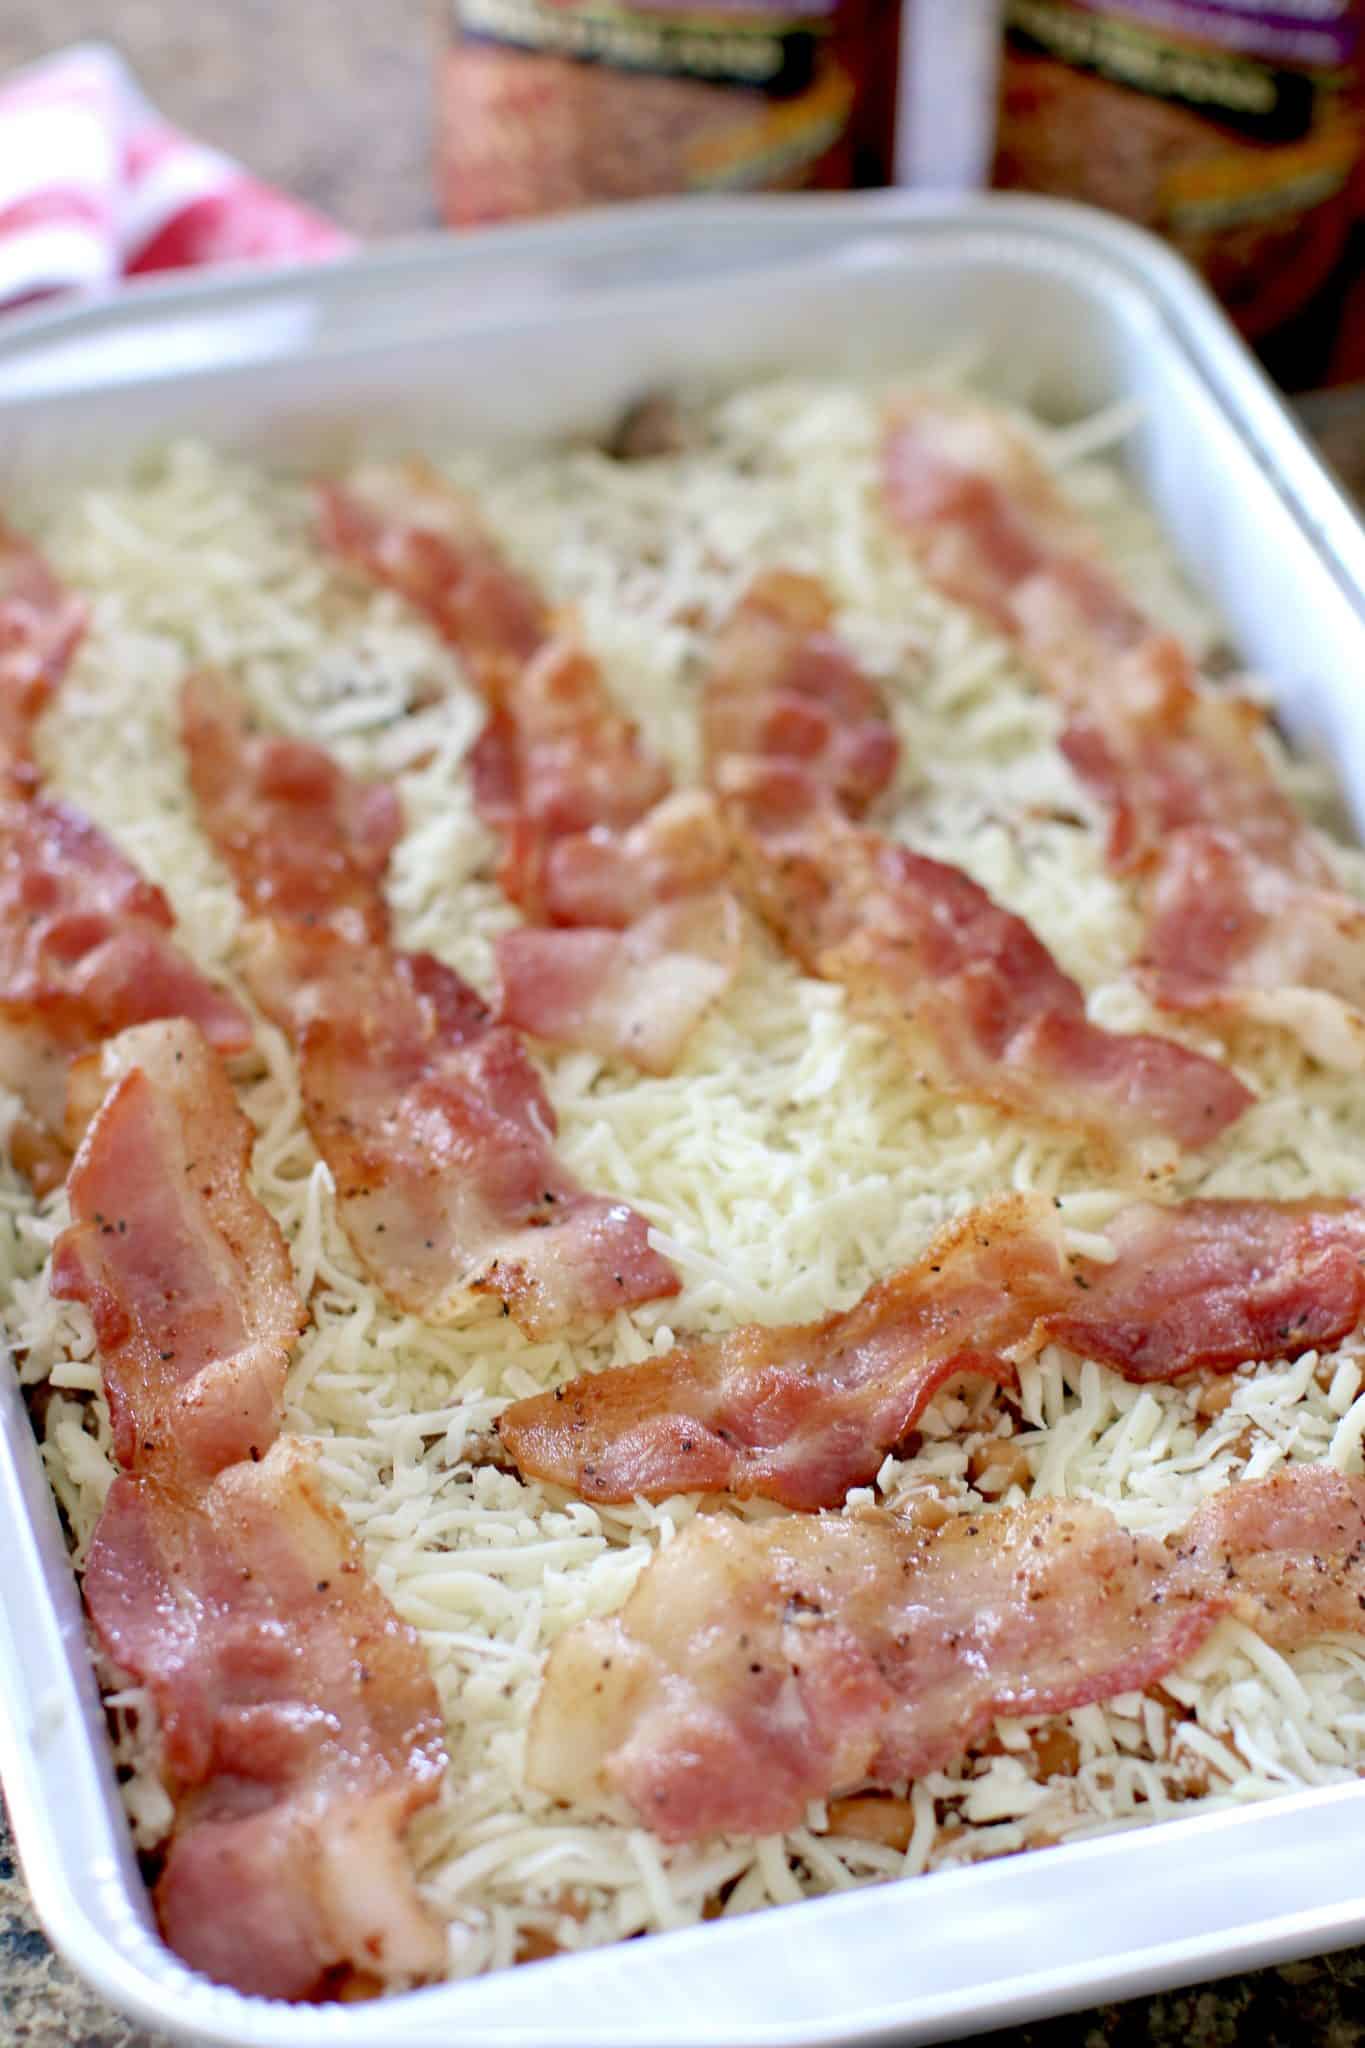 slices of bacon layered on the cheese in baking dish. 